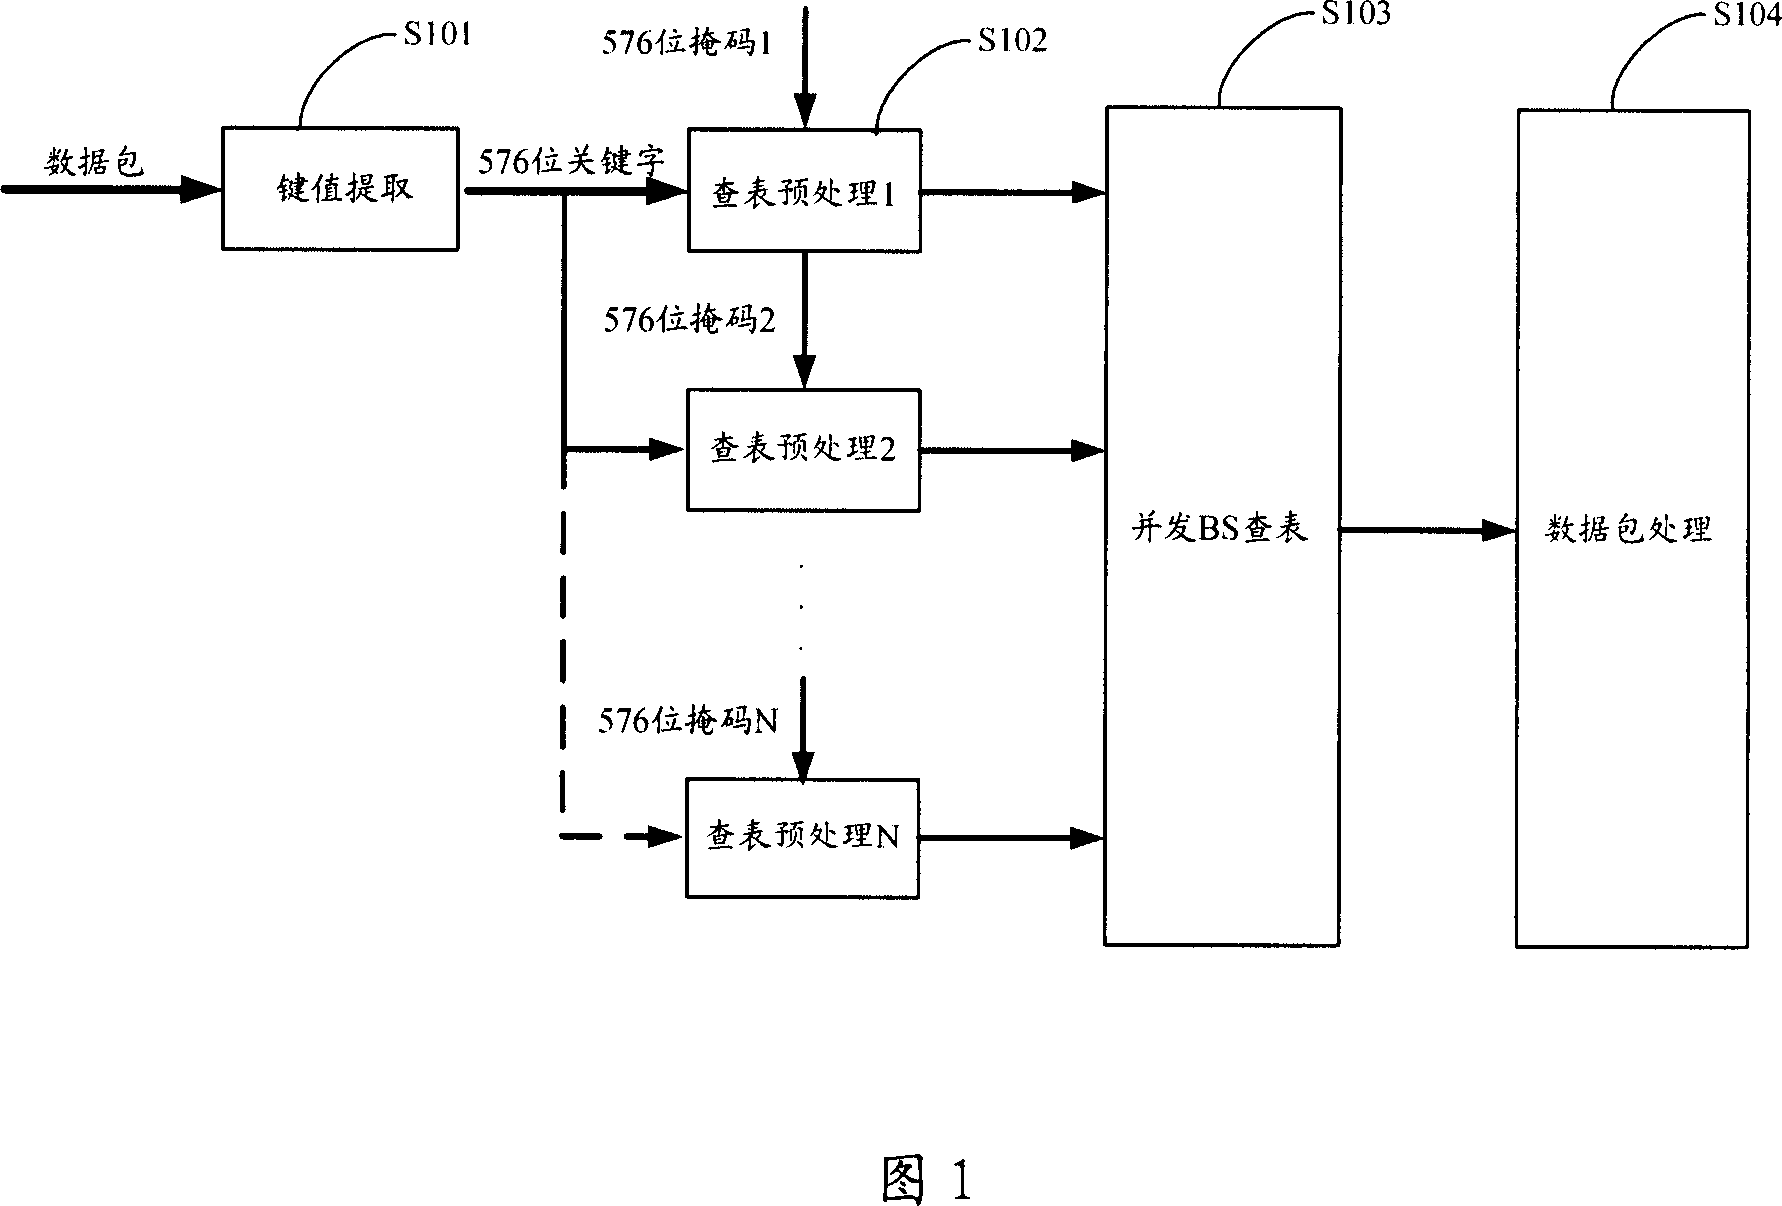 Fast package filter processing method and its apparatus